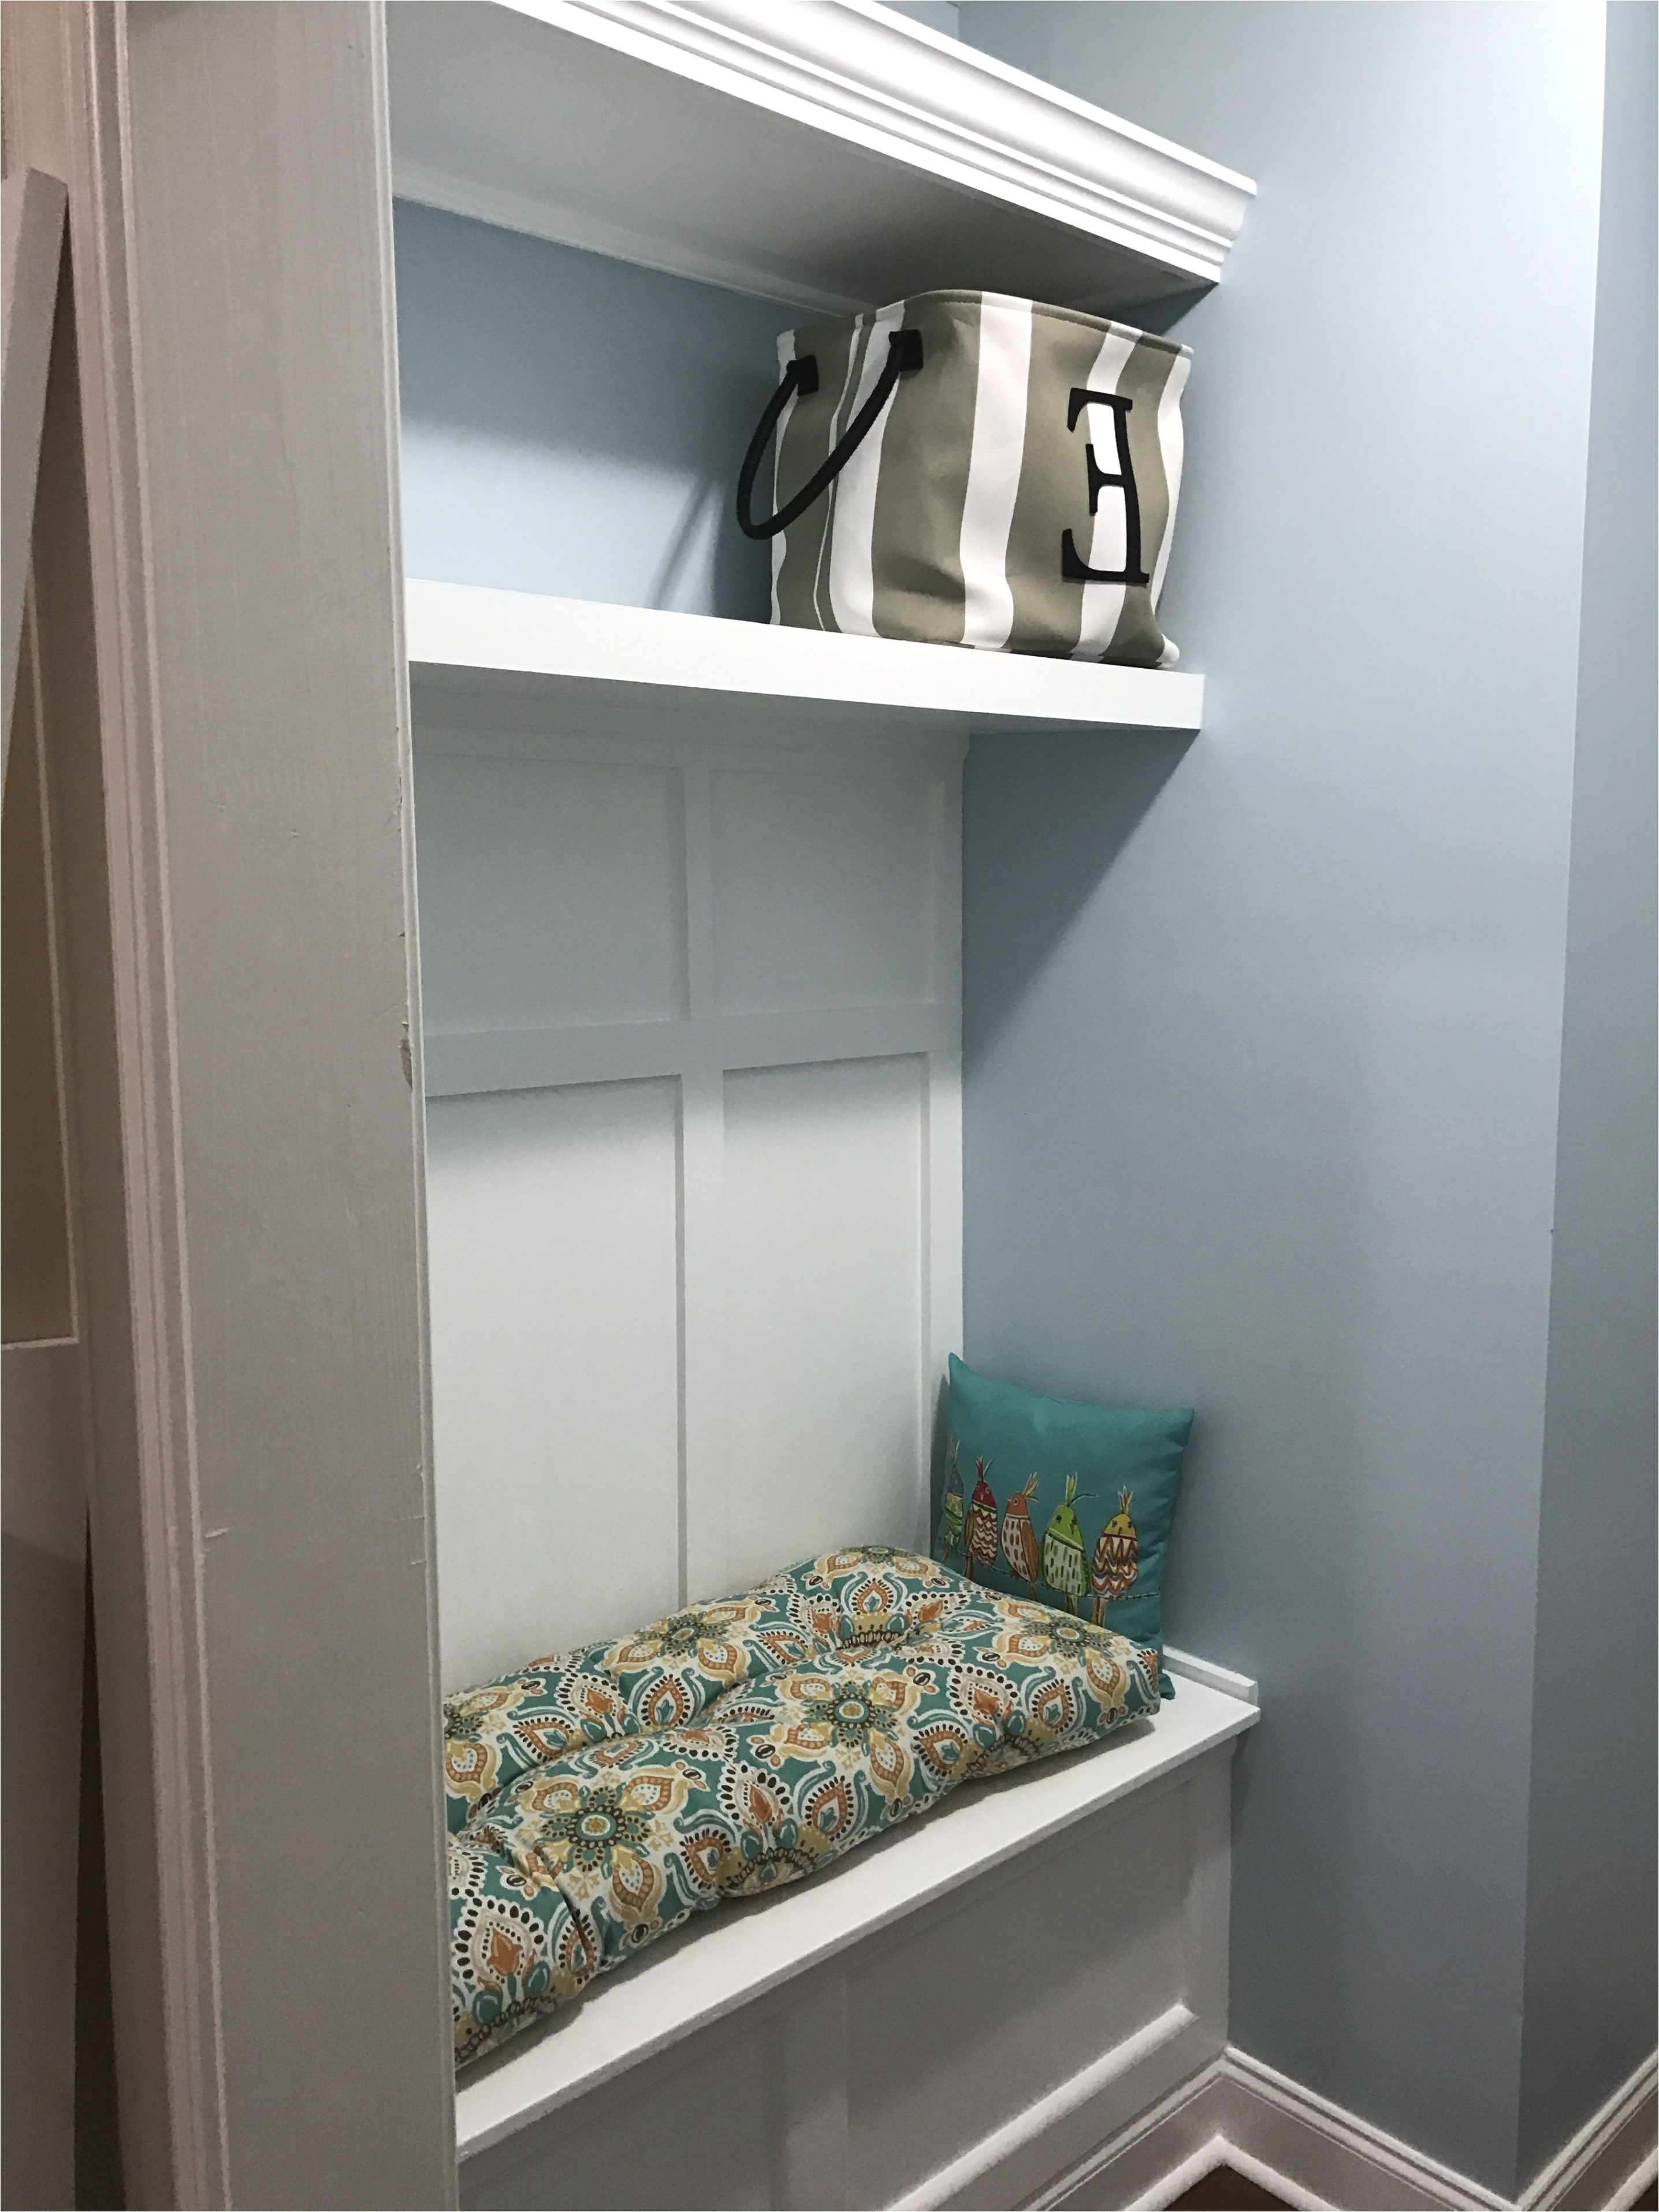 bookshelf bench lovely mud room after with built in storage bench seating shelves and